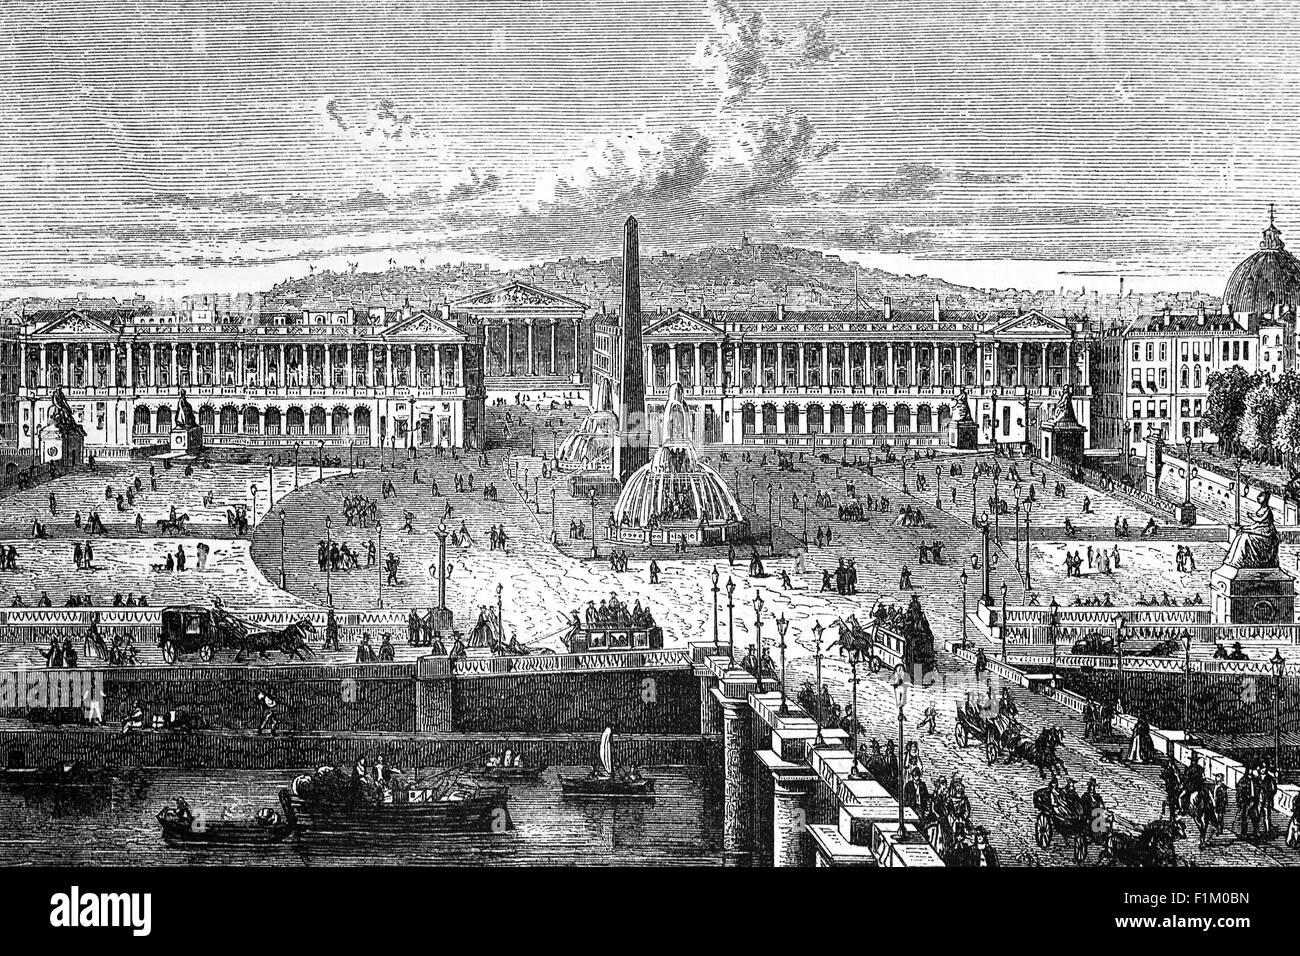 A 19th century view of the Place de la Concorde and River Seine, Paris, France. The Place de la Concorde  is the largest square in the French capital. It is located in the city's eighth arrondissement, at the eastern end of the Champs-Élysées.  It was the site of many notable public executions, including the executions of King Louis XVI and Marie Antoinette in the course of the French Revolution, during which the square was temporarily renamed Place de la Révolution. Stock Photo